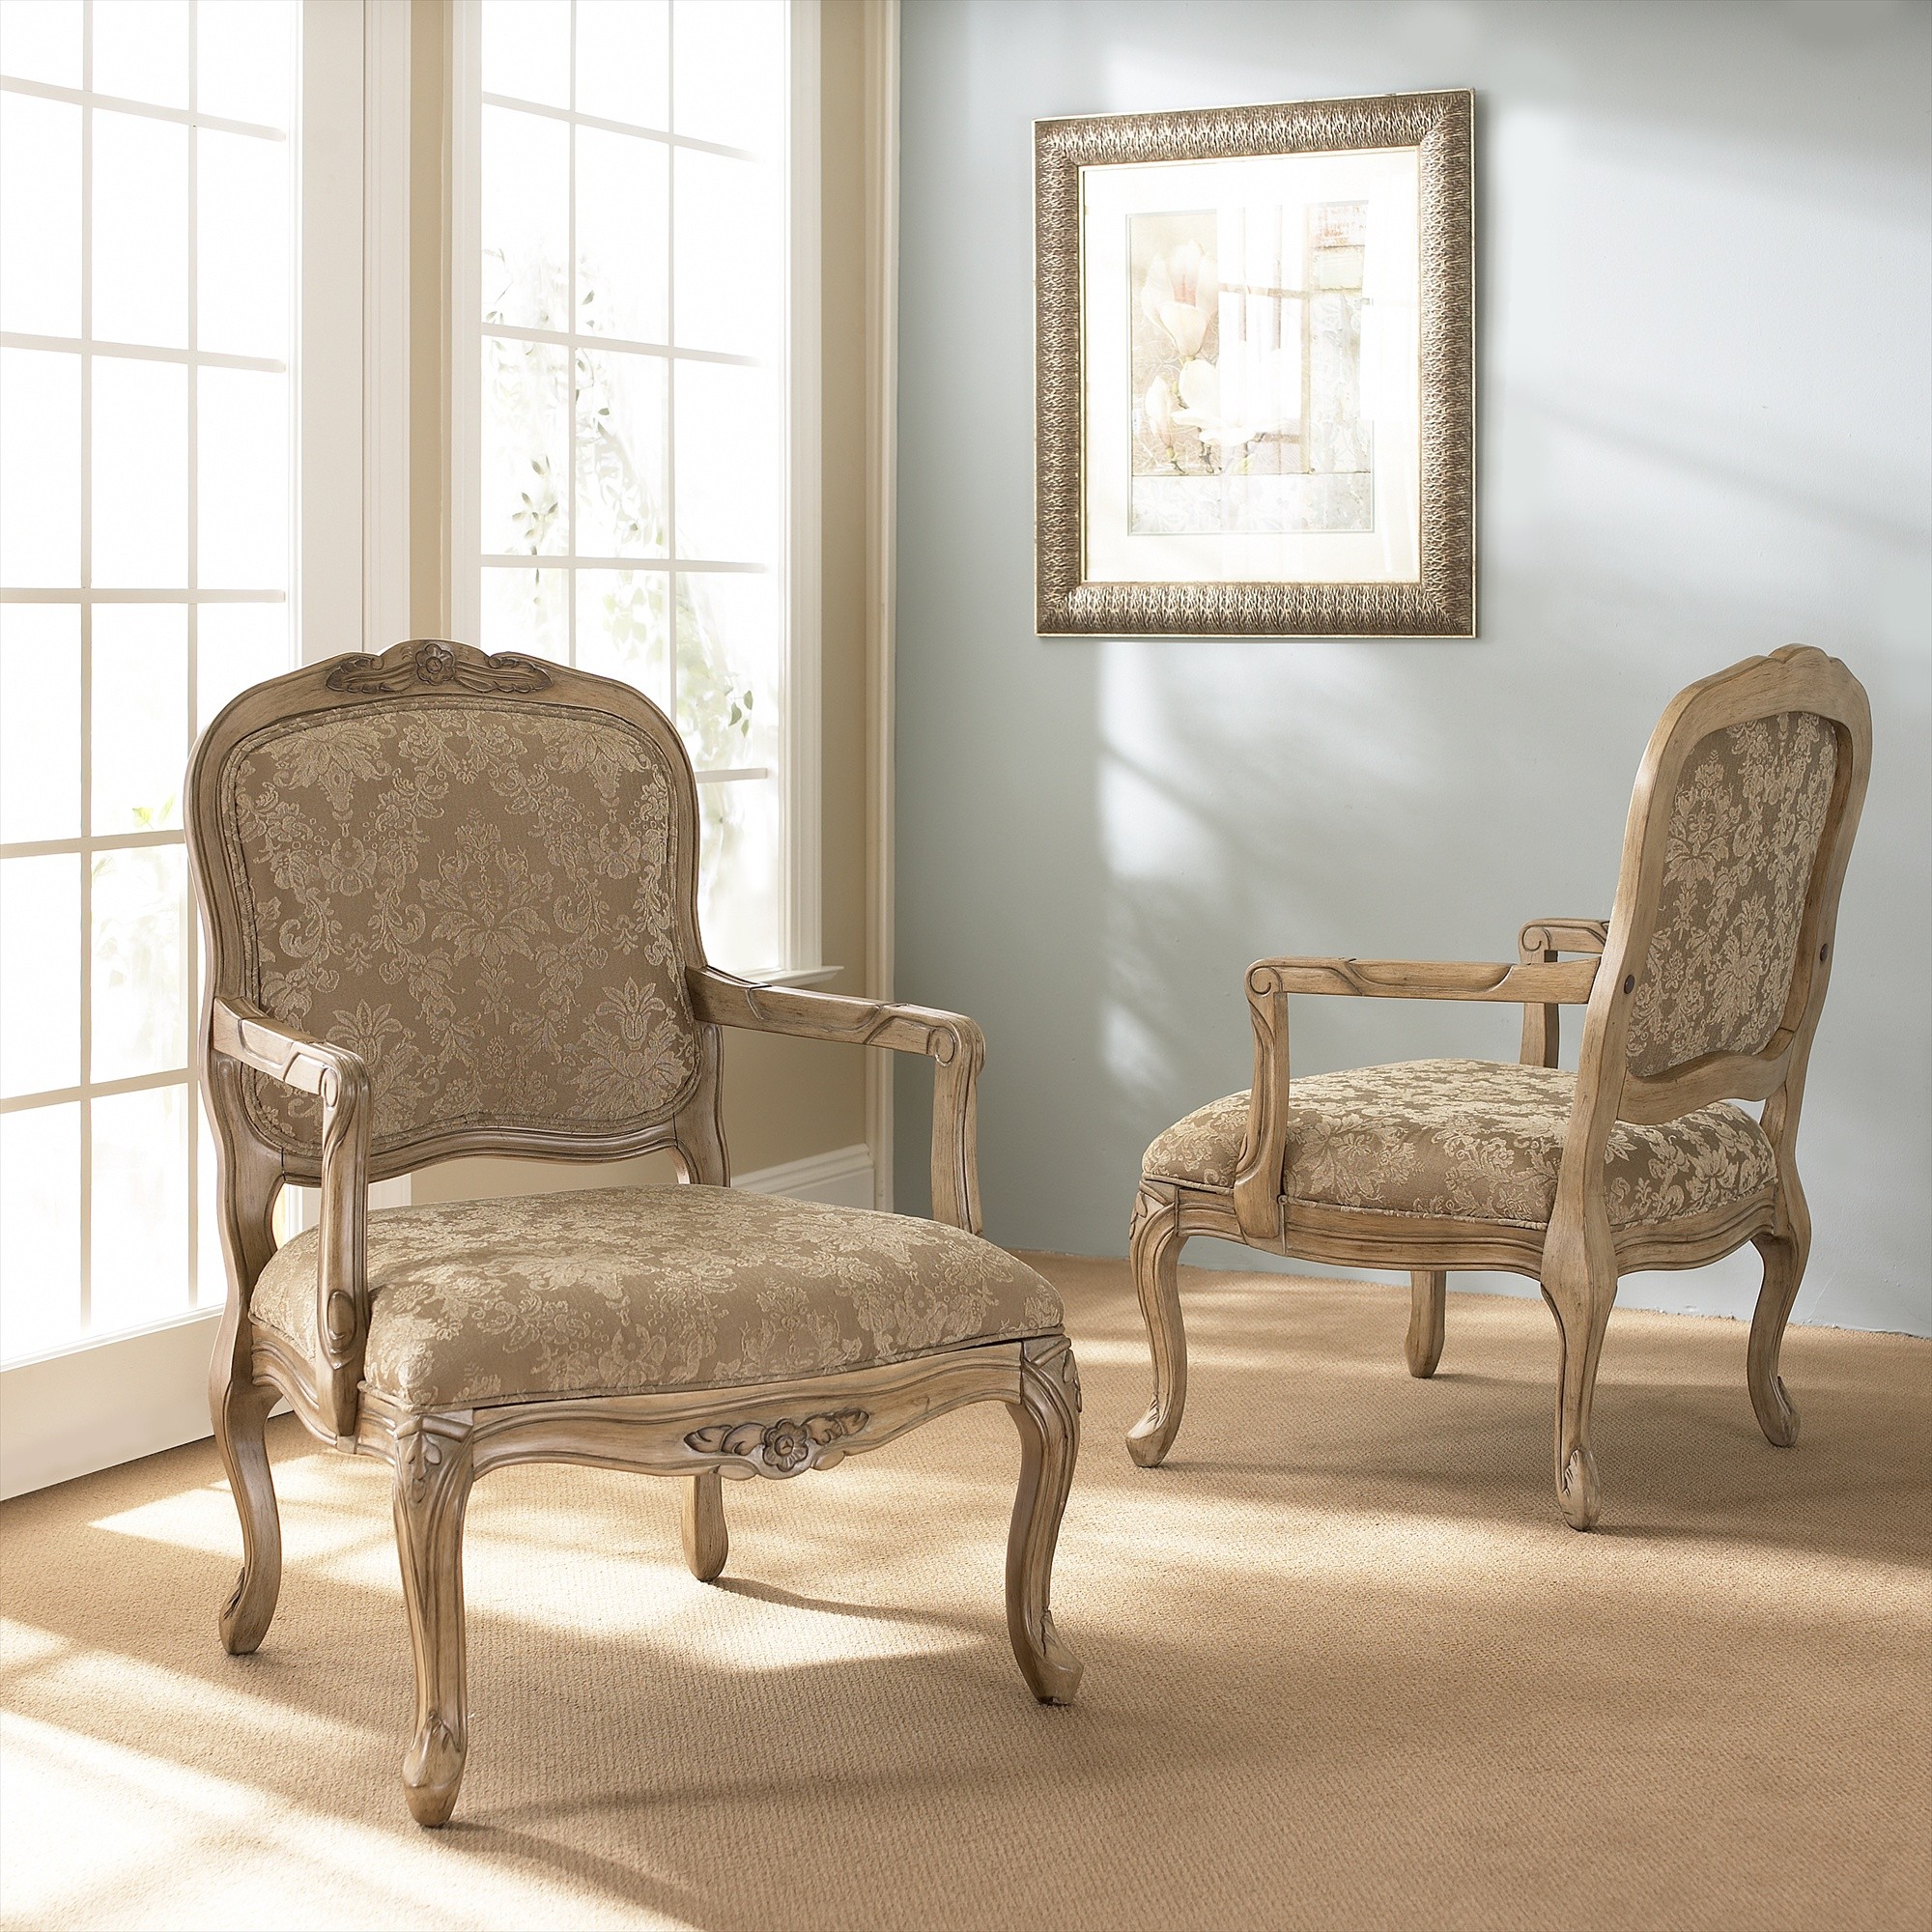 living chairs room accent chairs in living dining classic chair styles NADXYQS